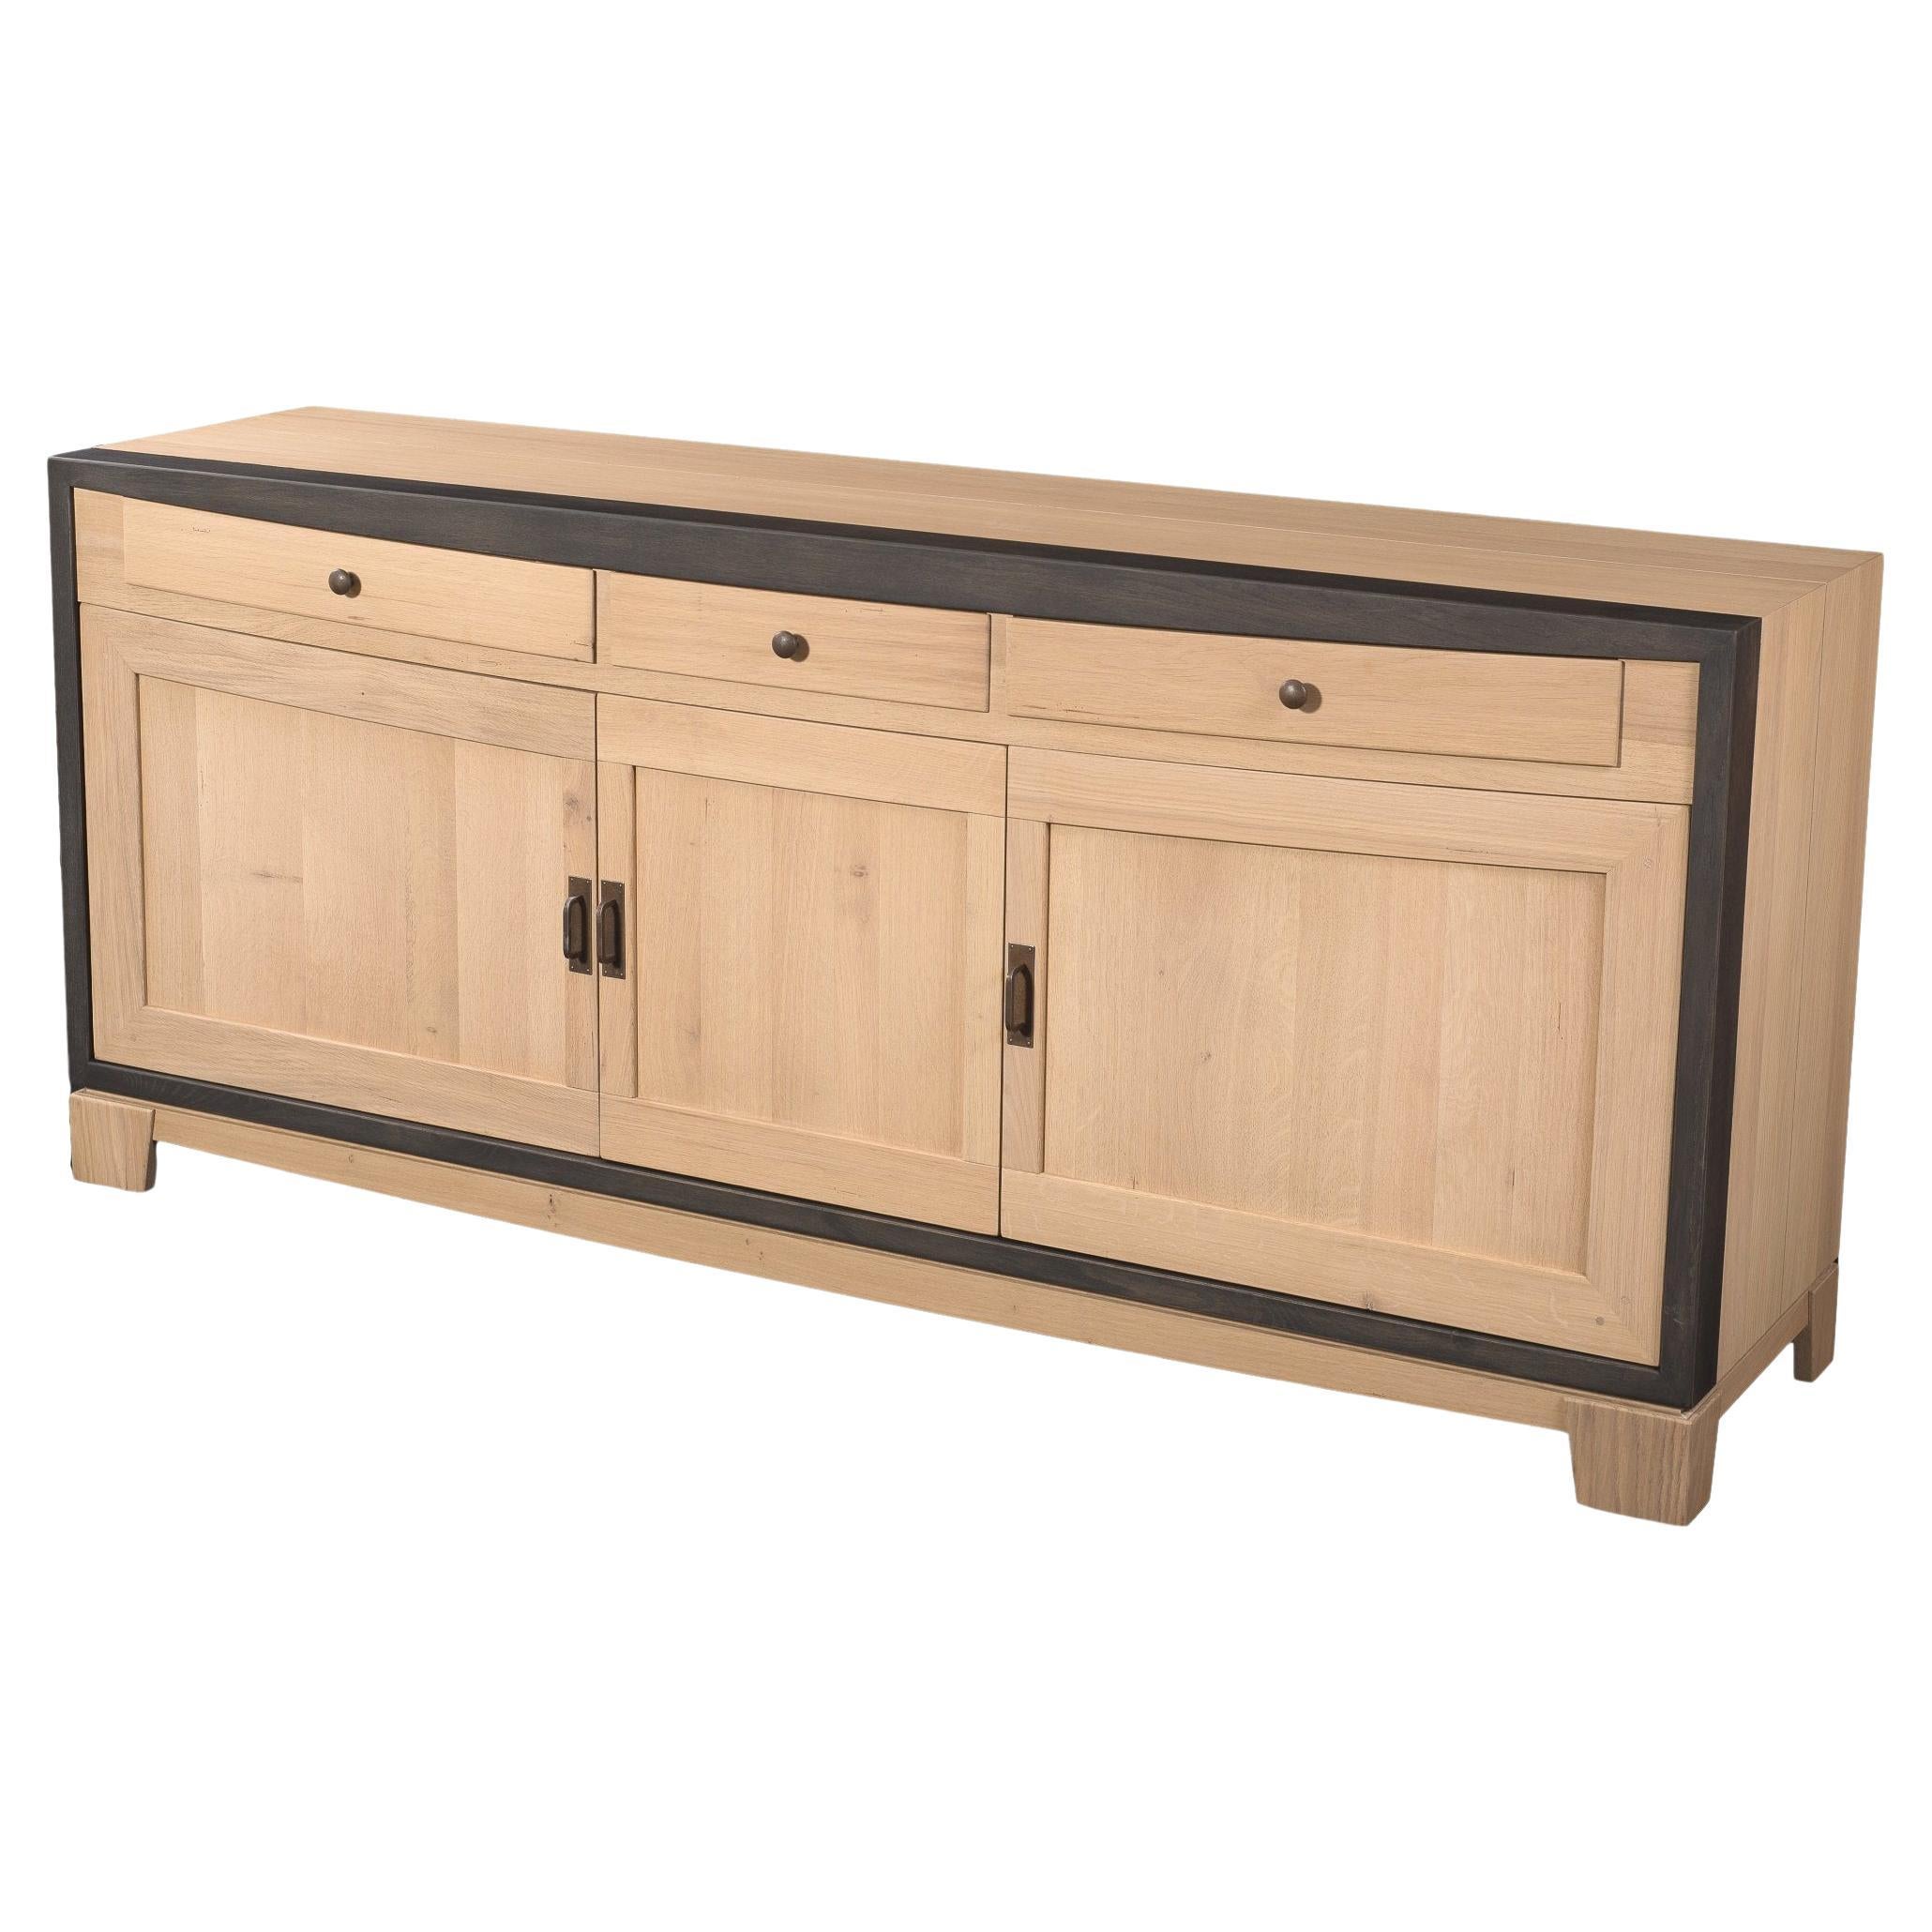 3 Doors Contemporary Sideboard in Oak with a Black Lacquered Frame